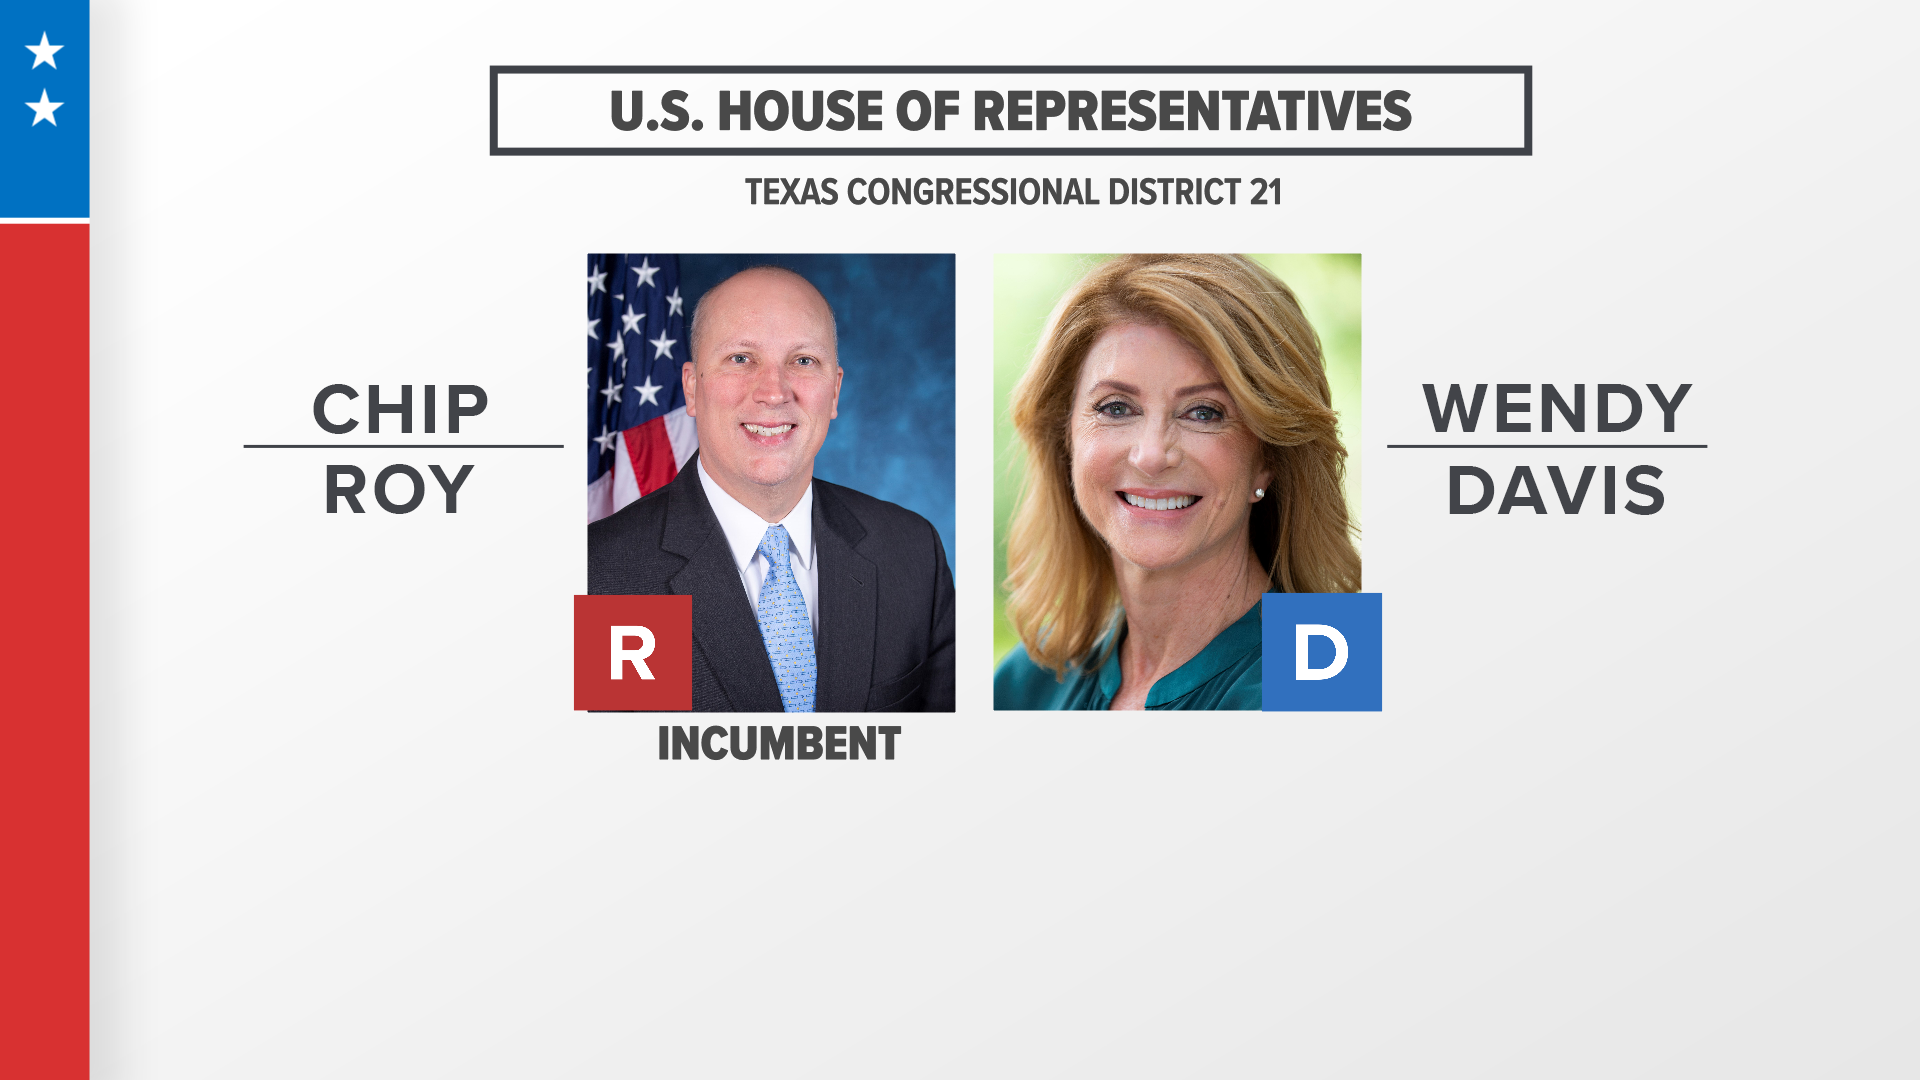 U.S. Rep. Chip Roy (R) is facing off against Wendy Davis (D) in the race to represent District 21 in the U.S. House of Representatives.